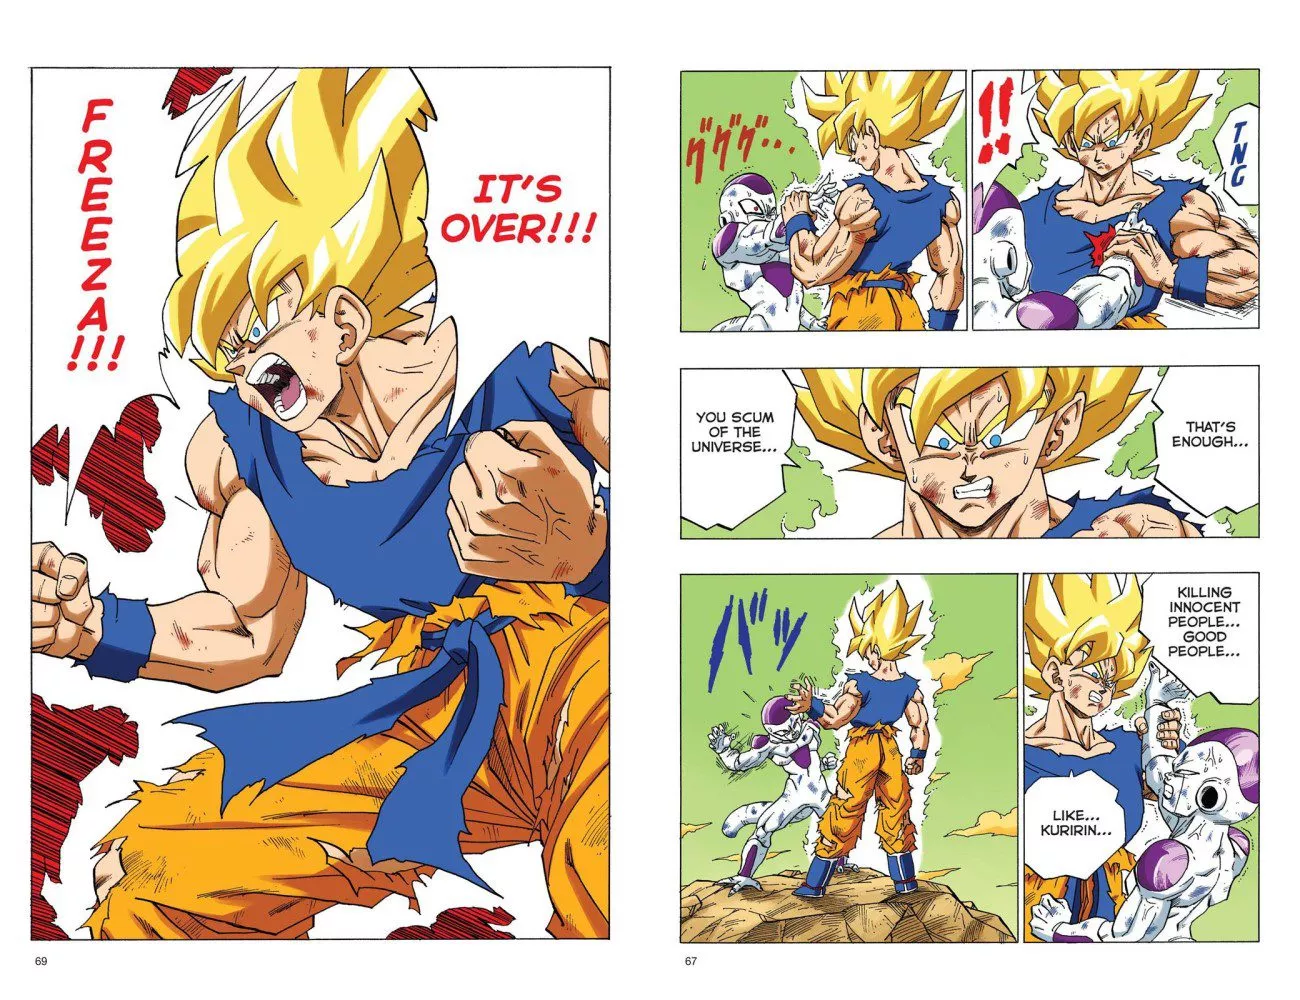 Goku's wrath made him not "enjoy" the battle anymore. He wanted to make Frieza pay.